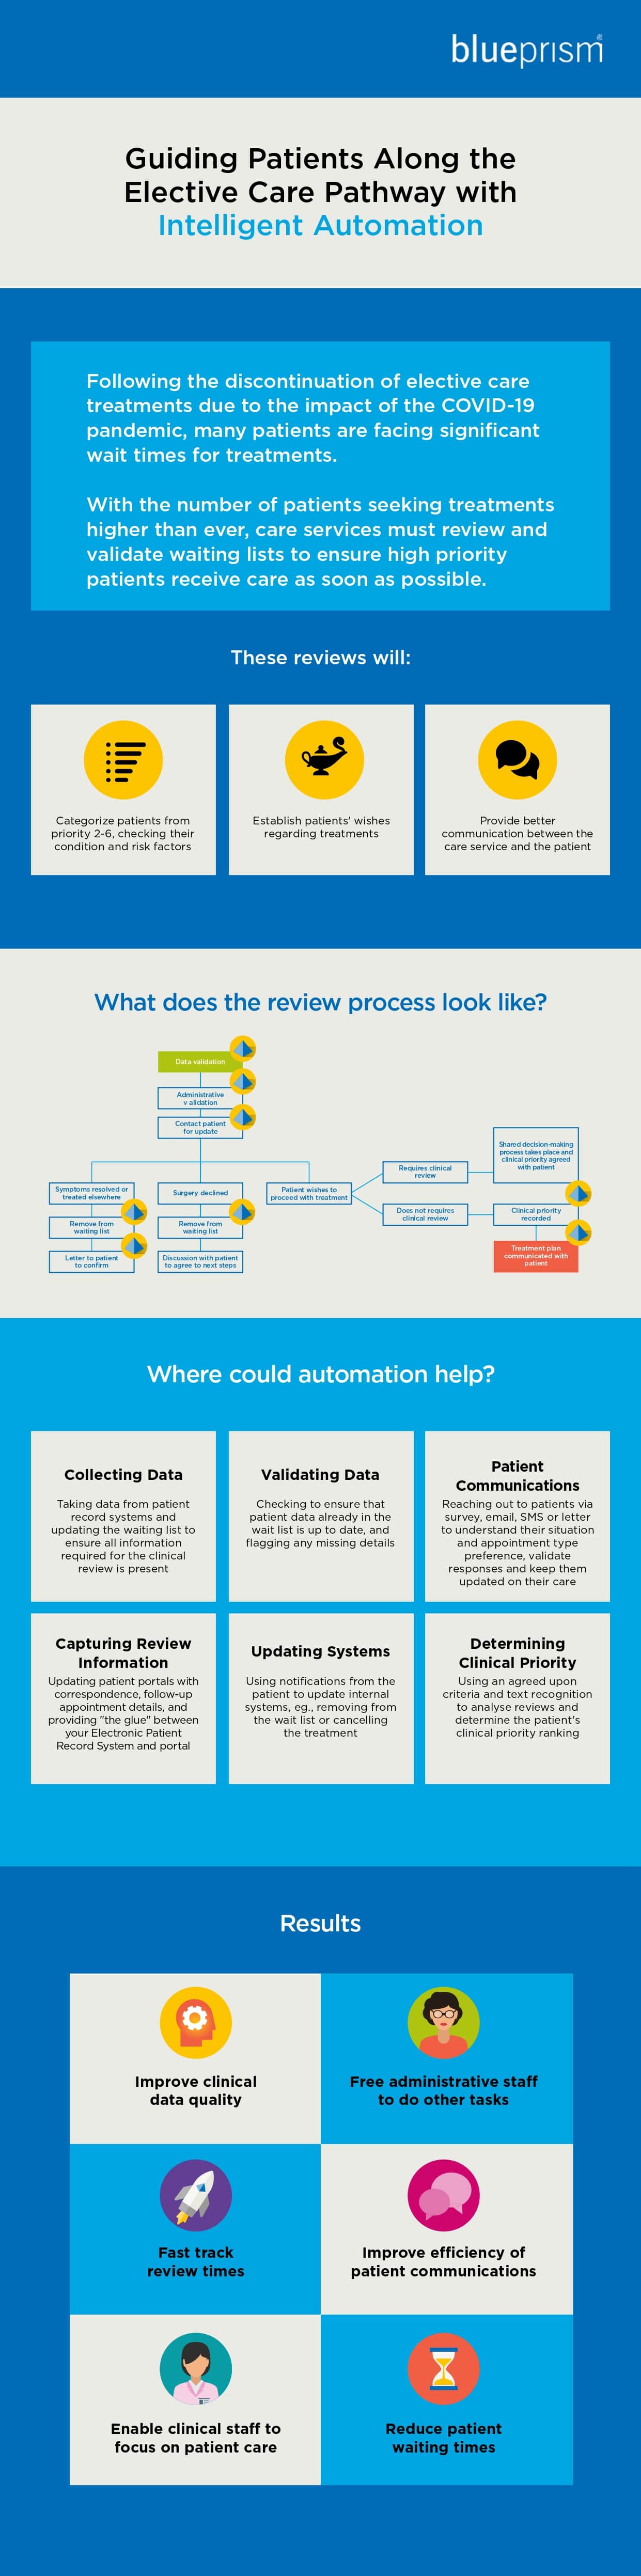 Improving Elective Care Pathway Processes with Automation Infographic